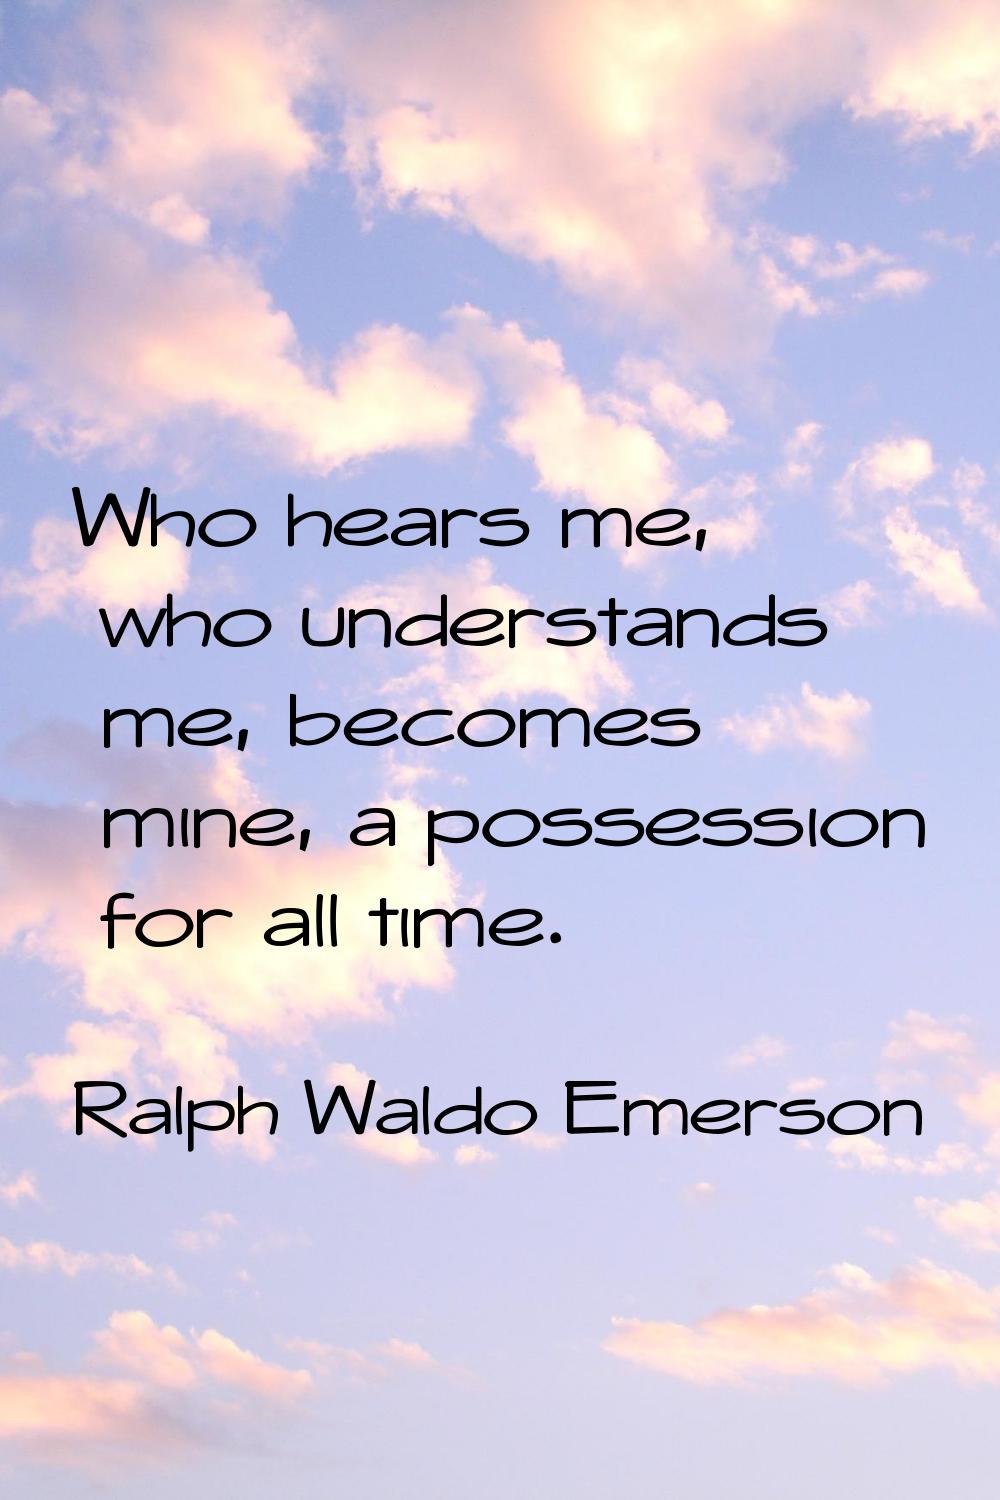 Who hears me, who understands me, becomes mine, a possession for all time.